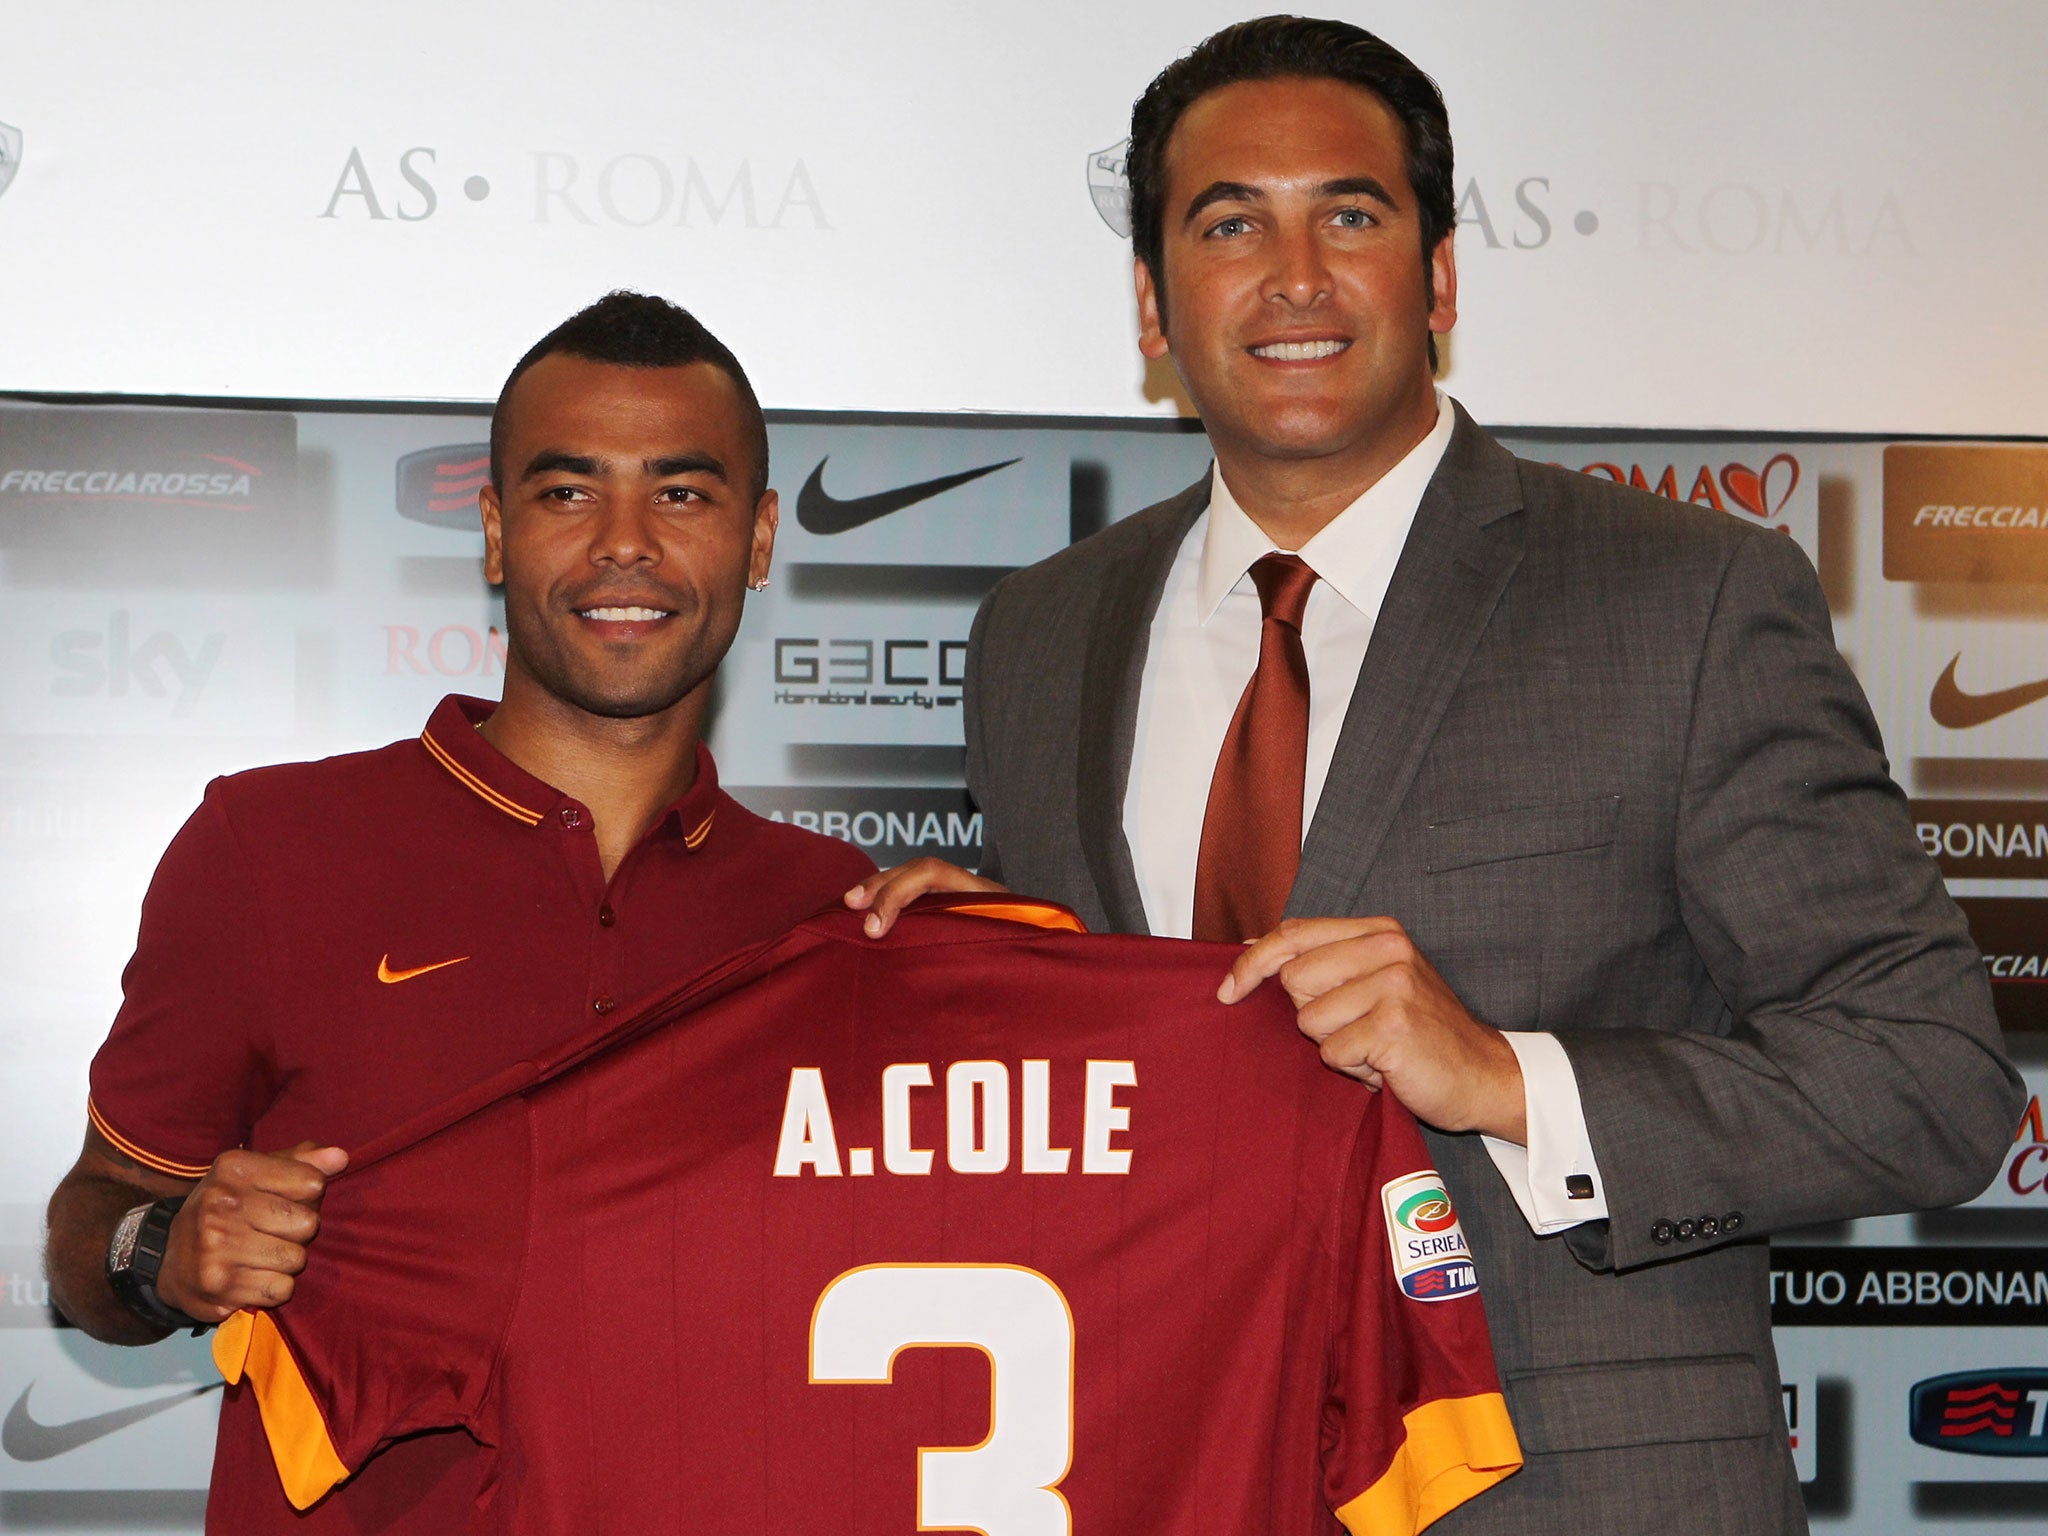 Ashley Cole says top English players are afraid of going to play abroad